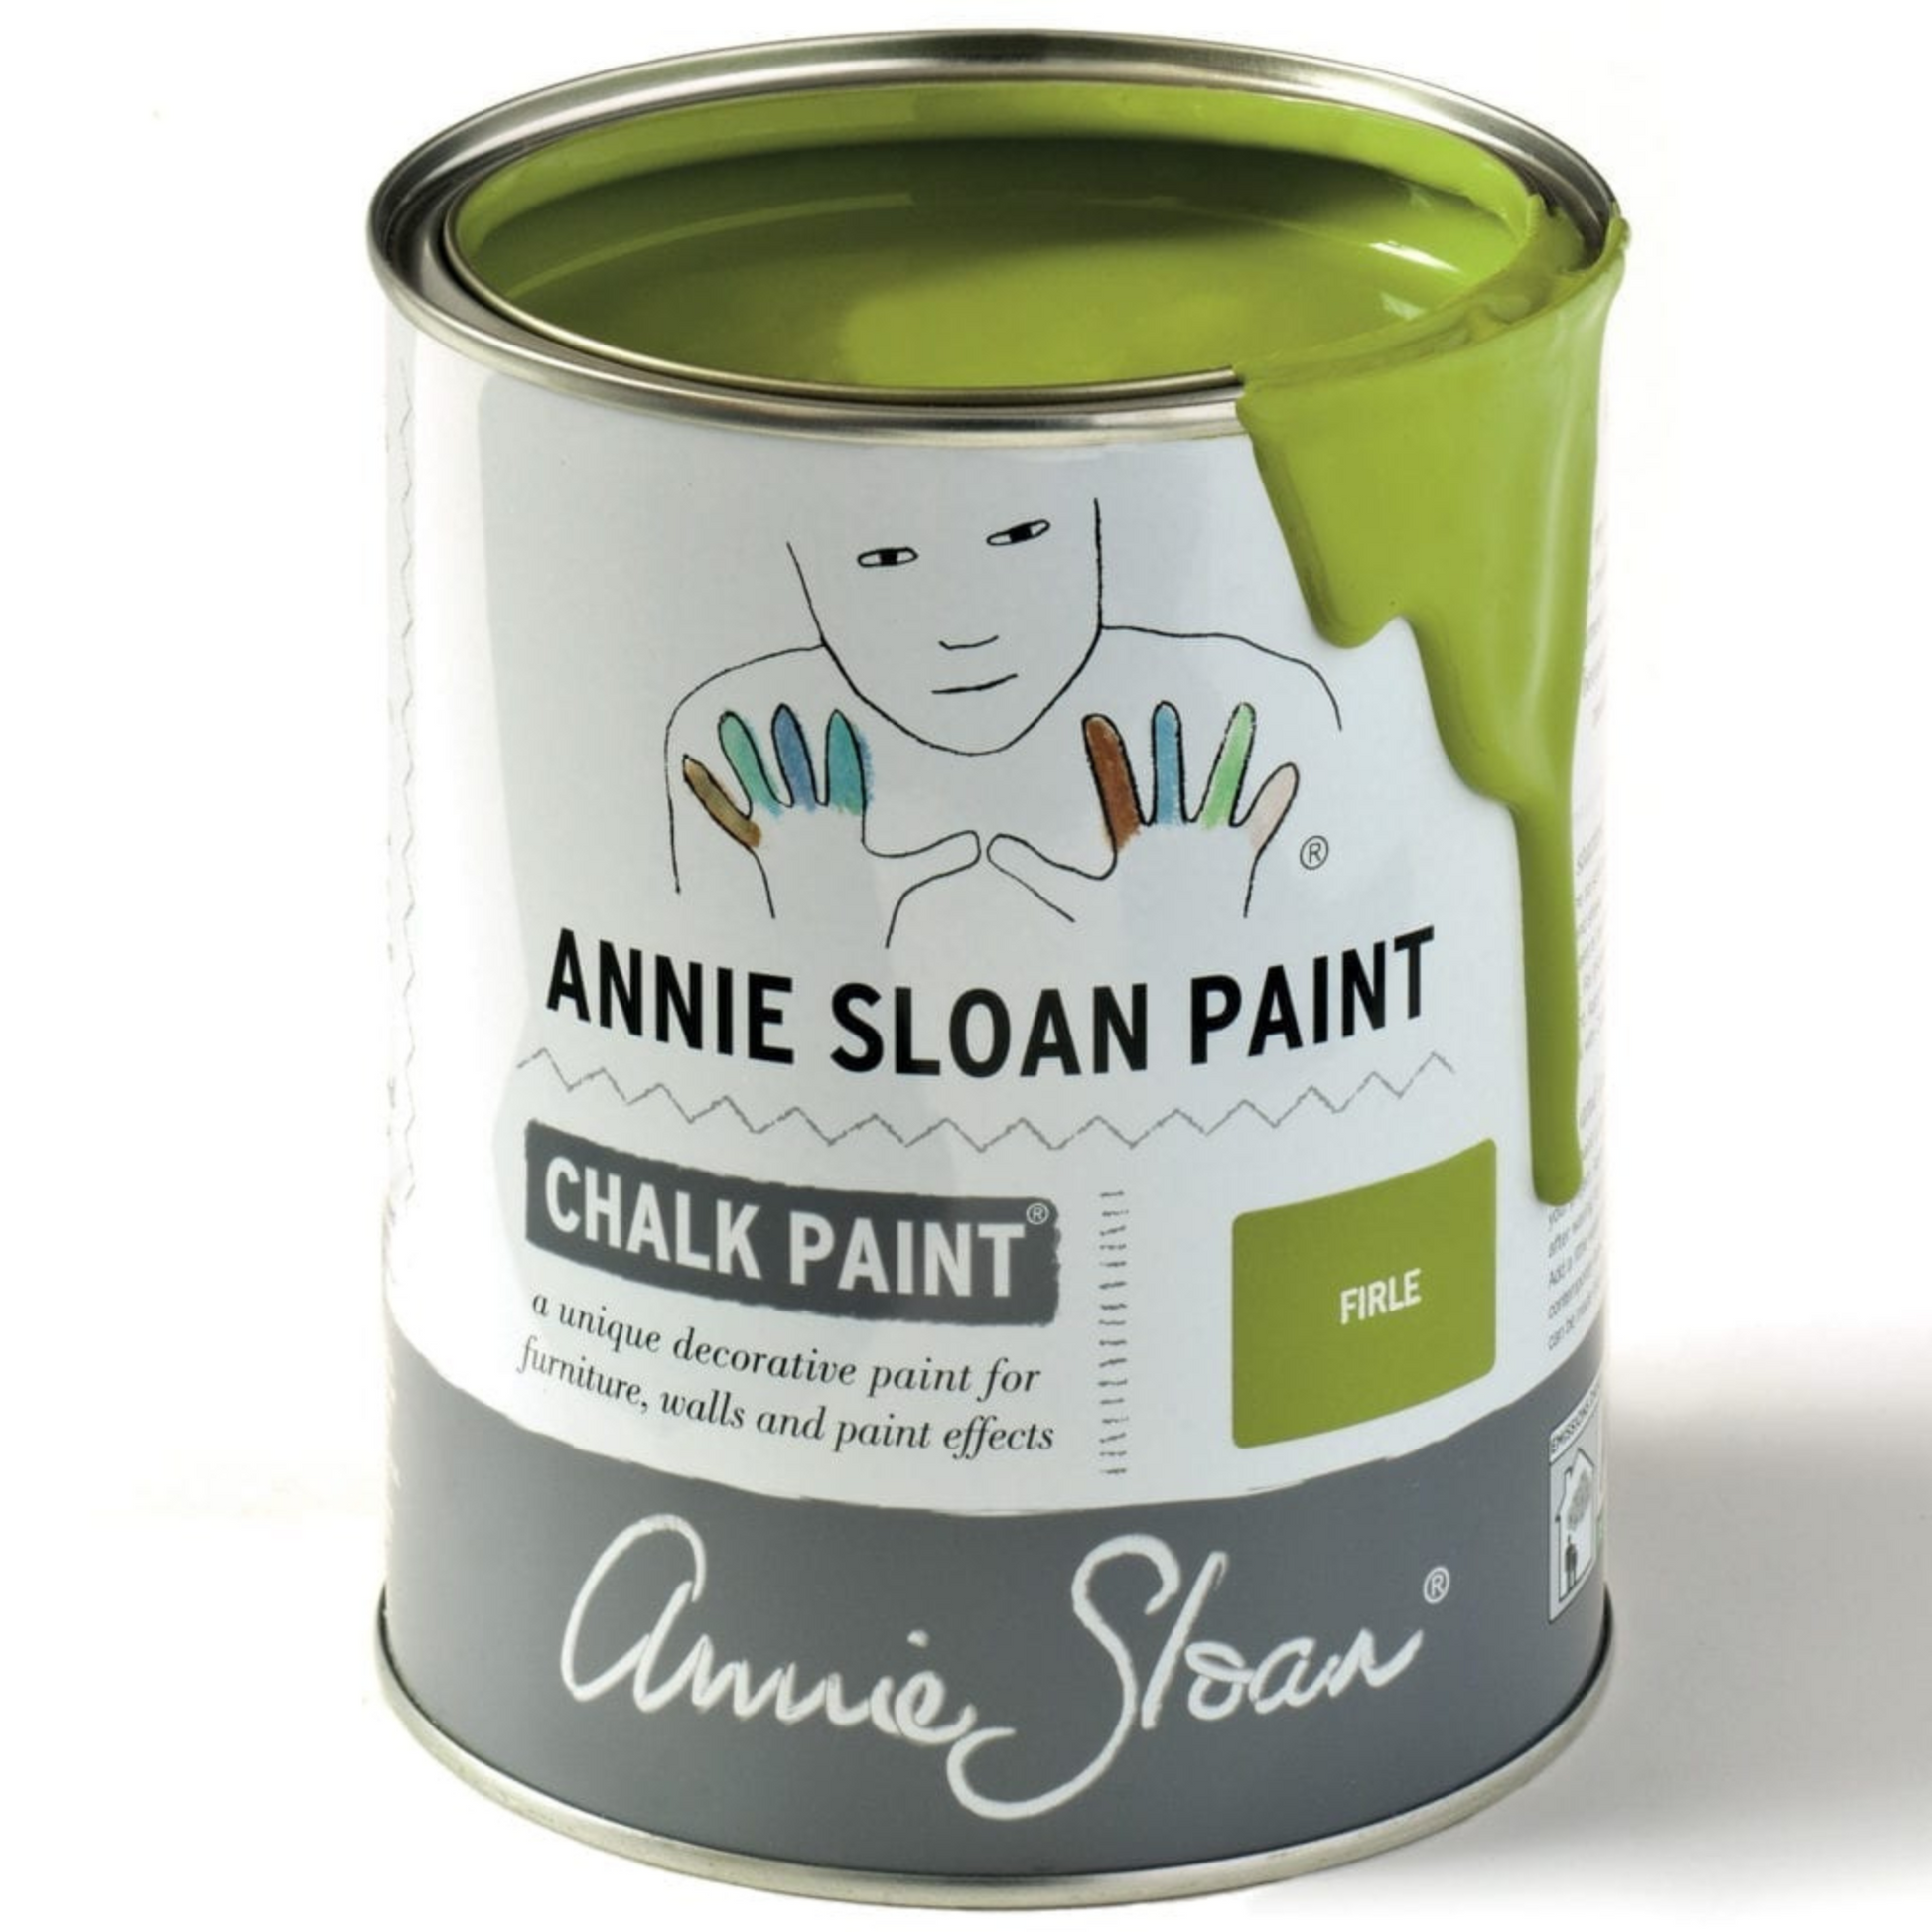 Can of Firle Annie Sloan Chalk Paint.